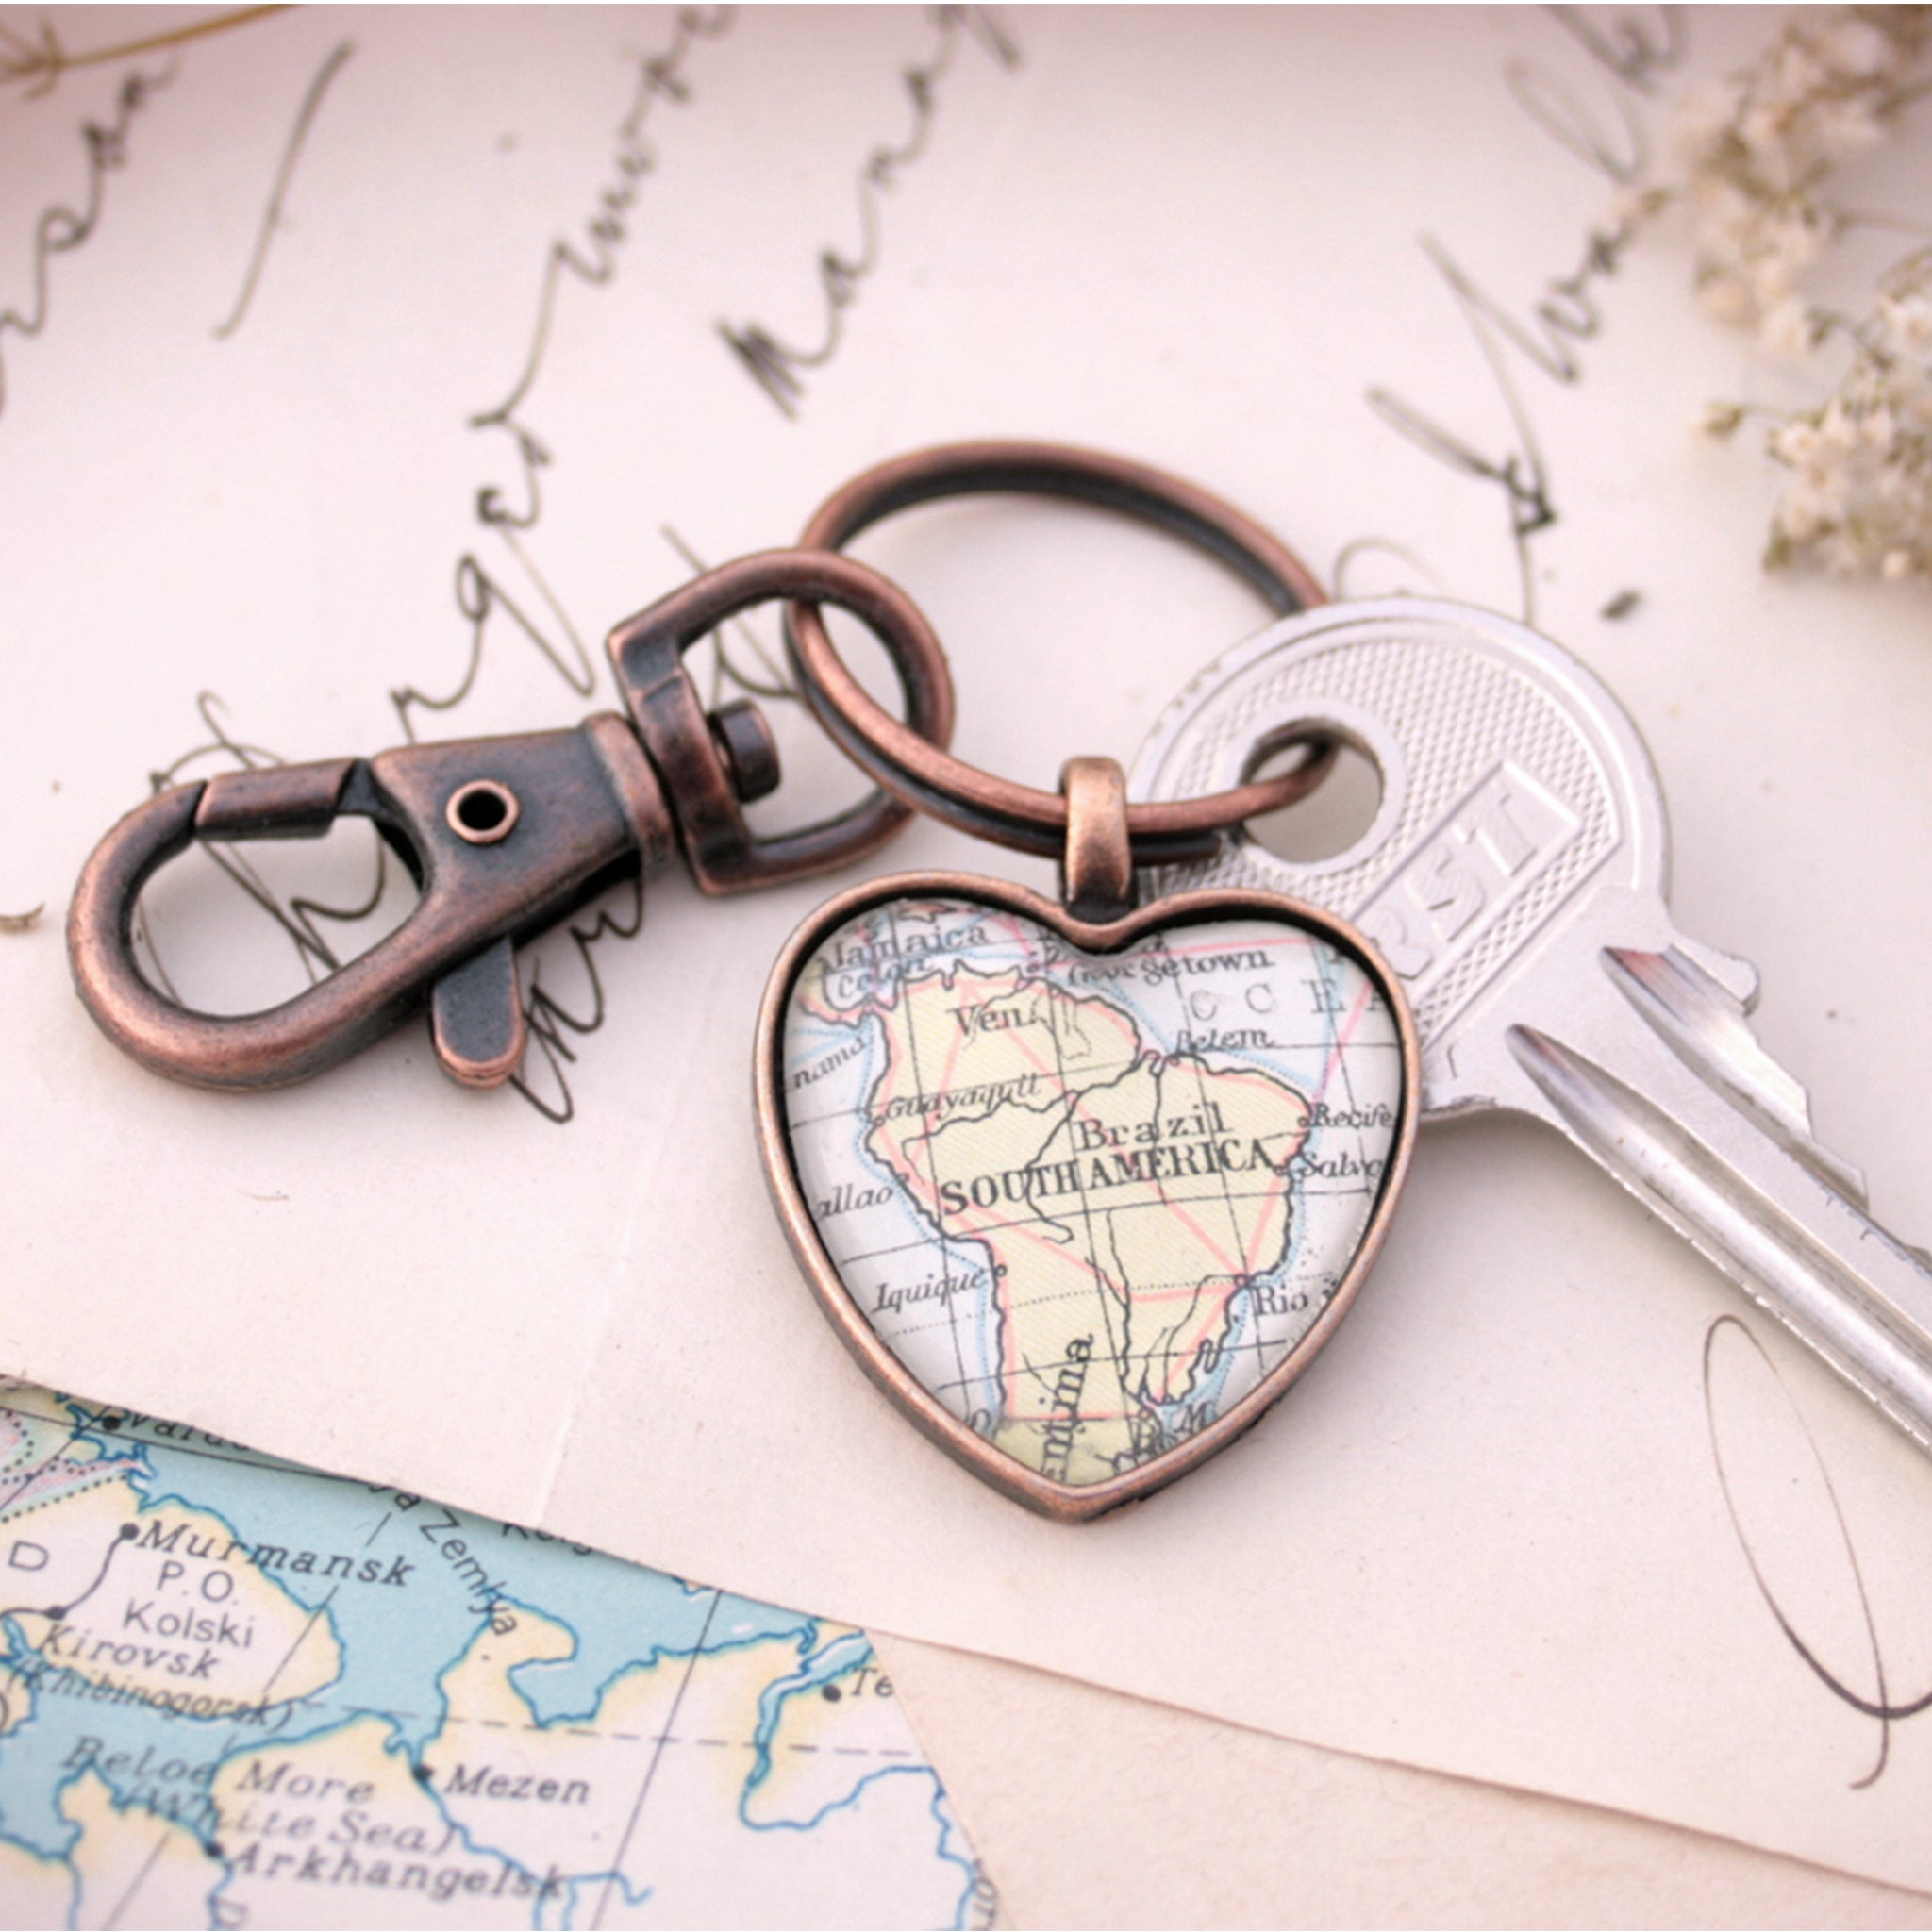 Heart shaped keychain in copper tone featuring map of South America